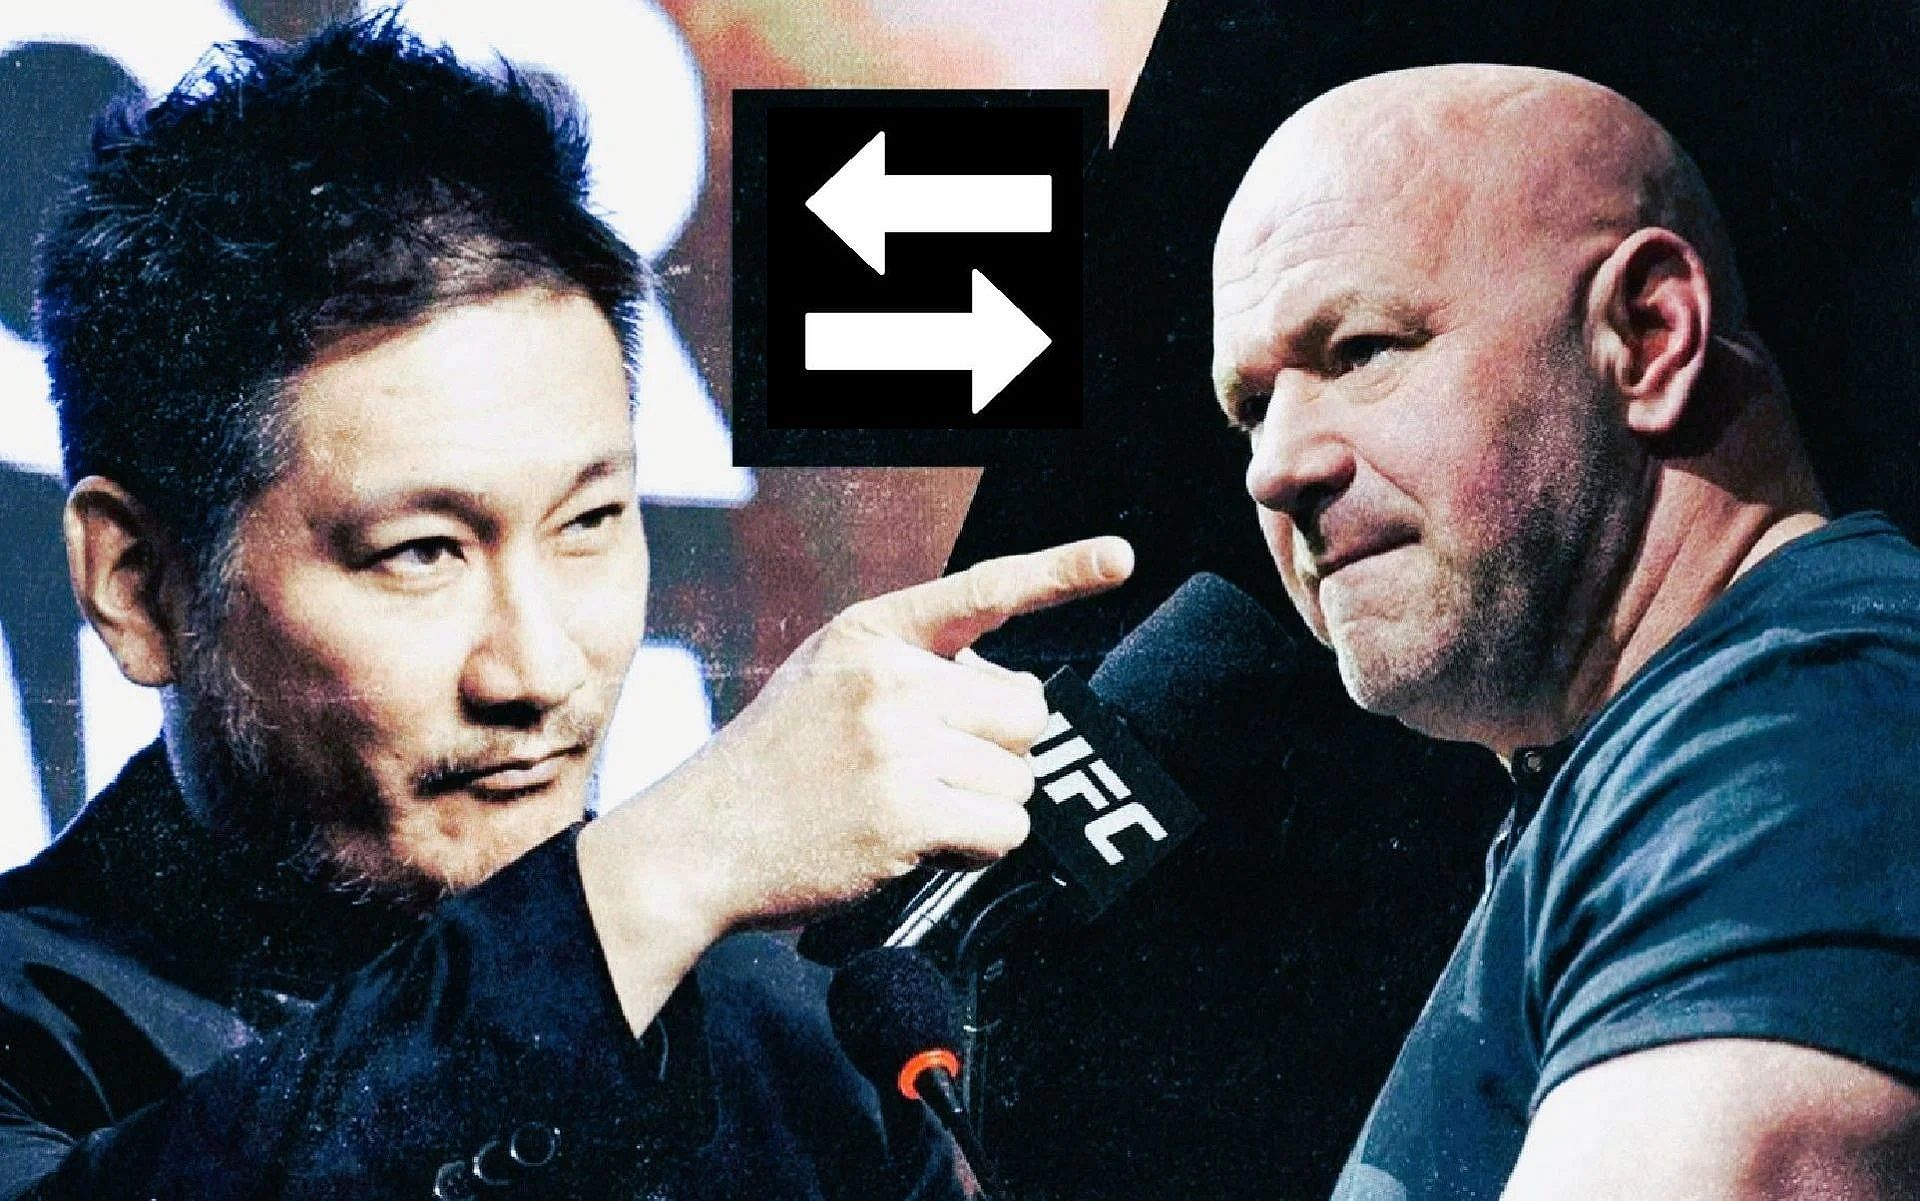 ONE CEO Chatri Sityodtong (left) and UFC president Dana White (right) [Images via ONE and Getty]